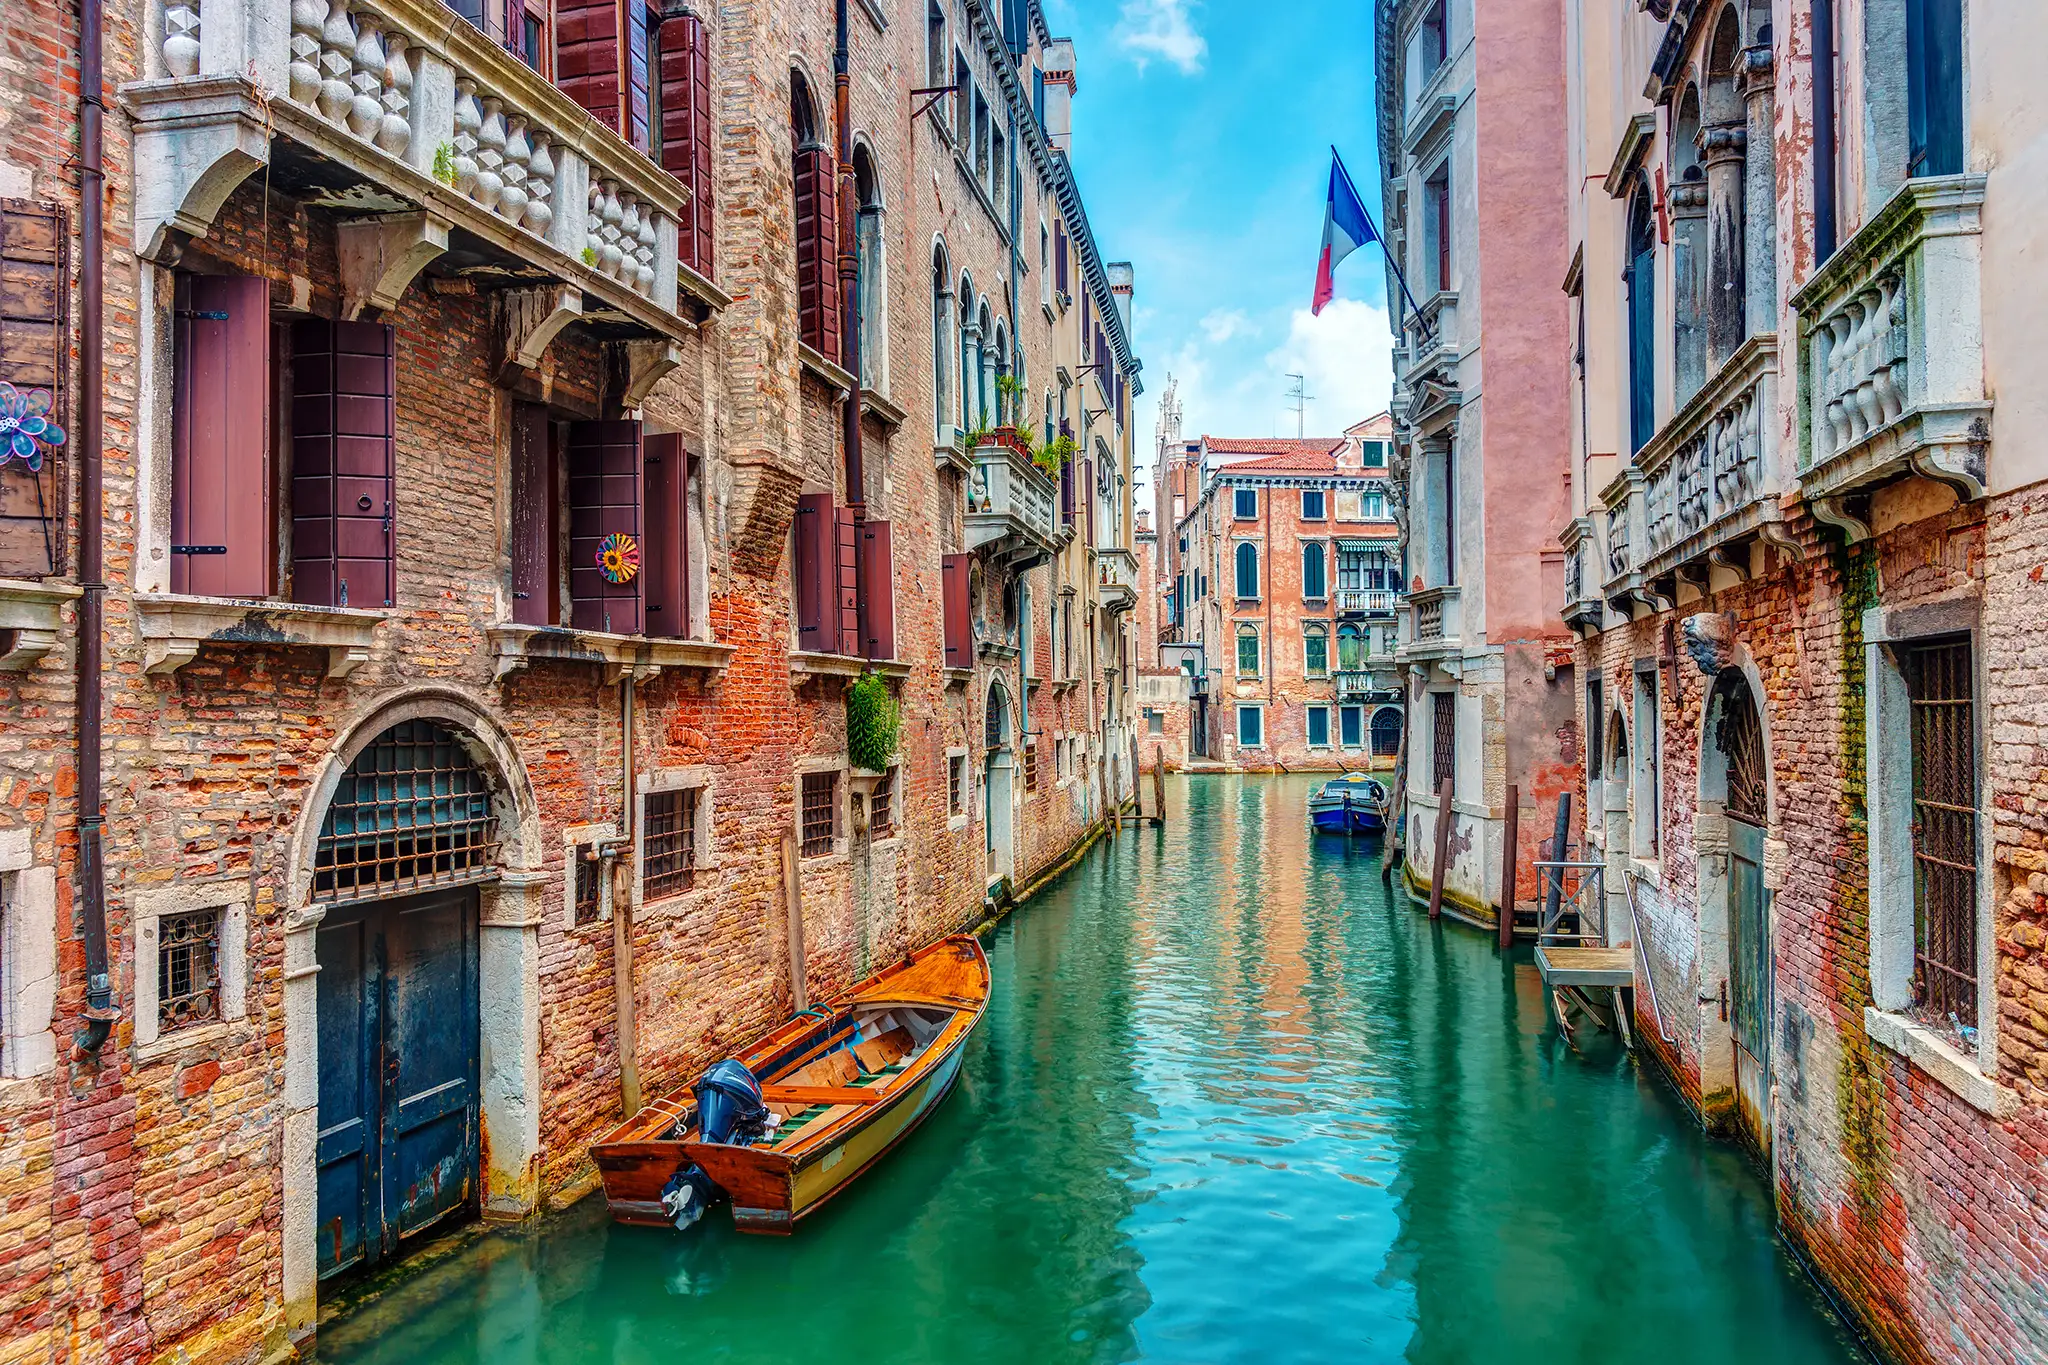 View down a canal in Venice.